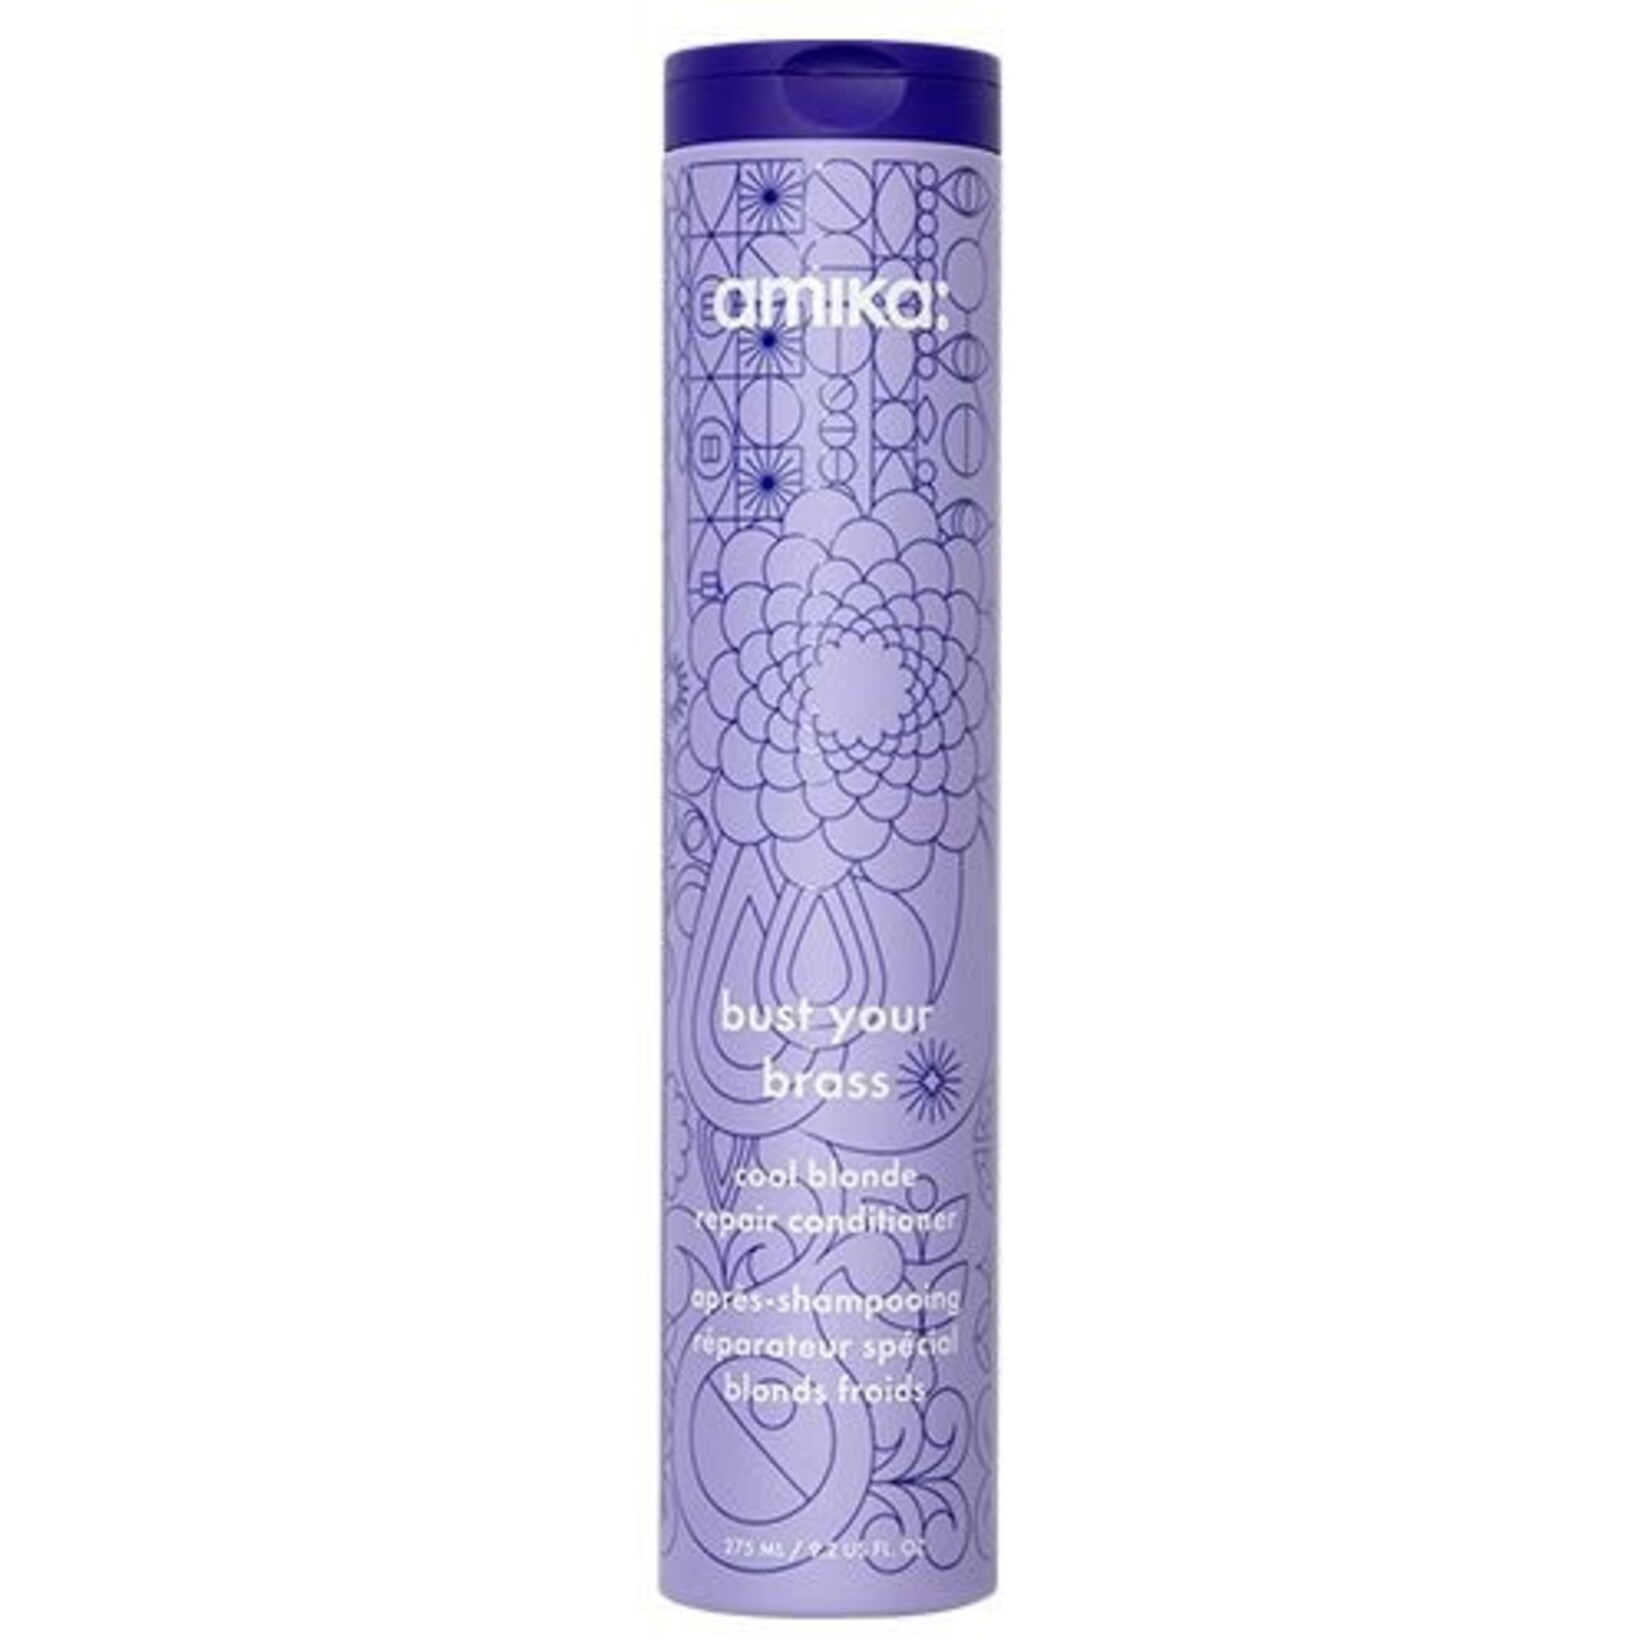 Amika: Amika: - Bust Your Brass - Cool blonde conditioner 275ml